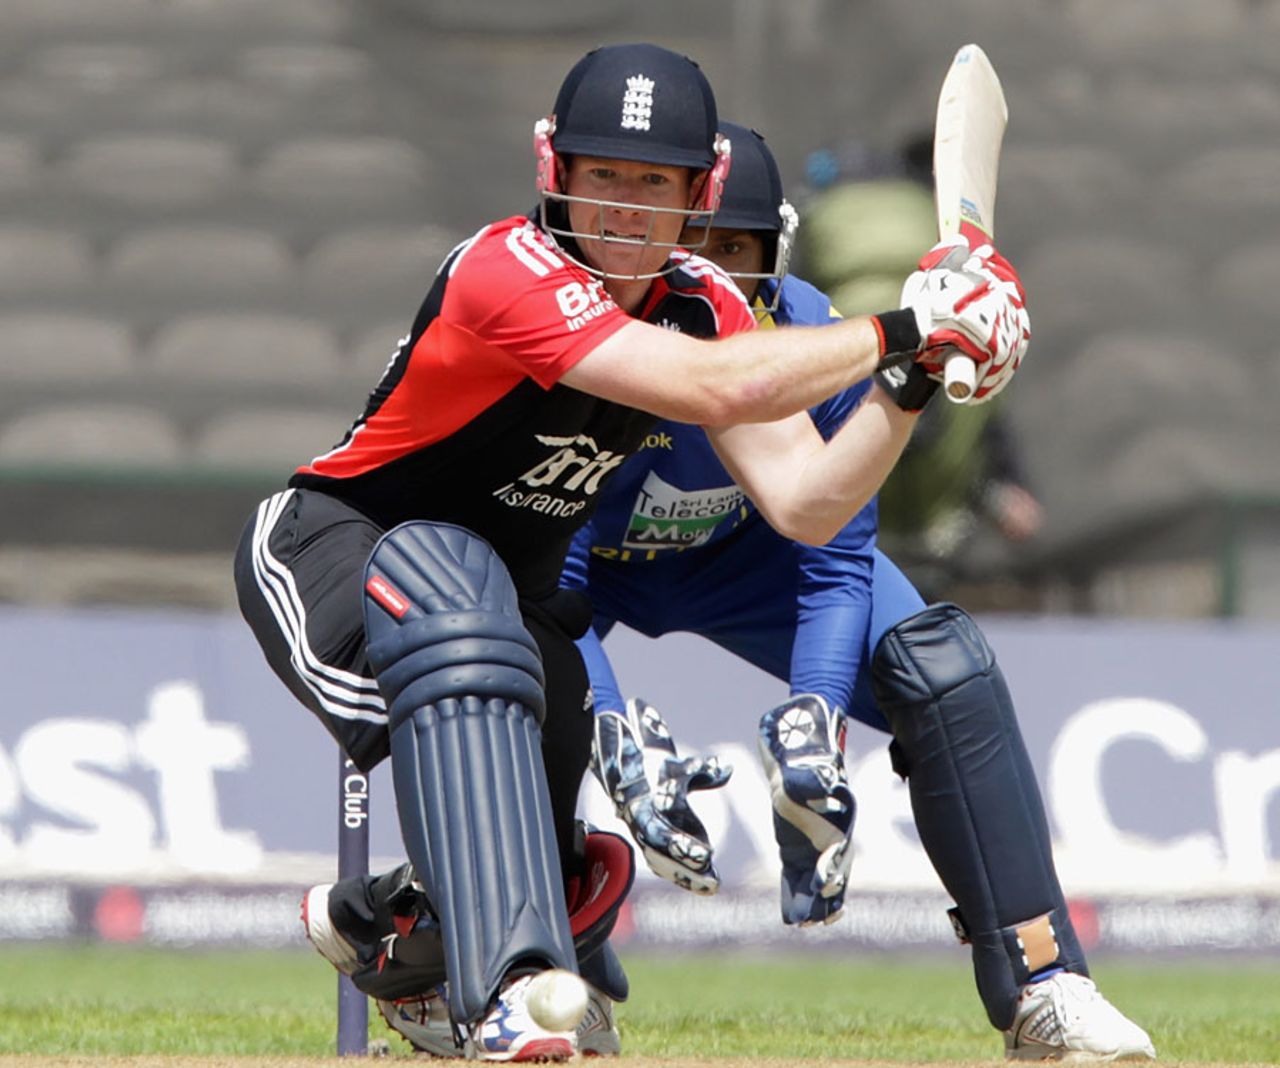 Eoin Morgan manoeuvred the ball superbly in an 60-ball 57, England v Sri Lanka, 5th ODI, Old Trafford, July 9 2011